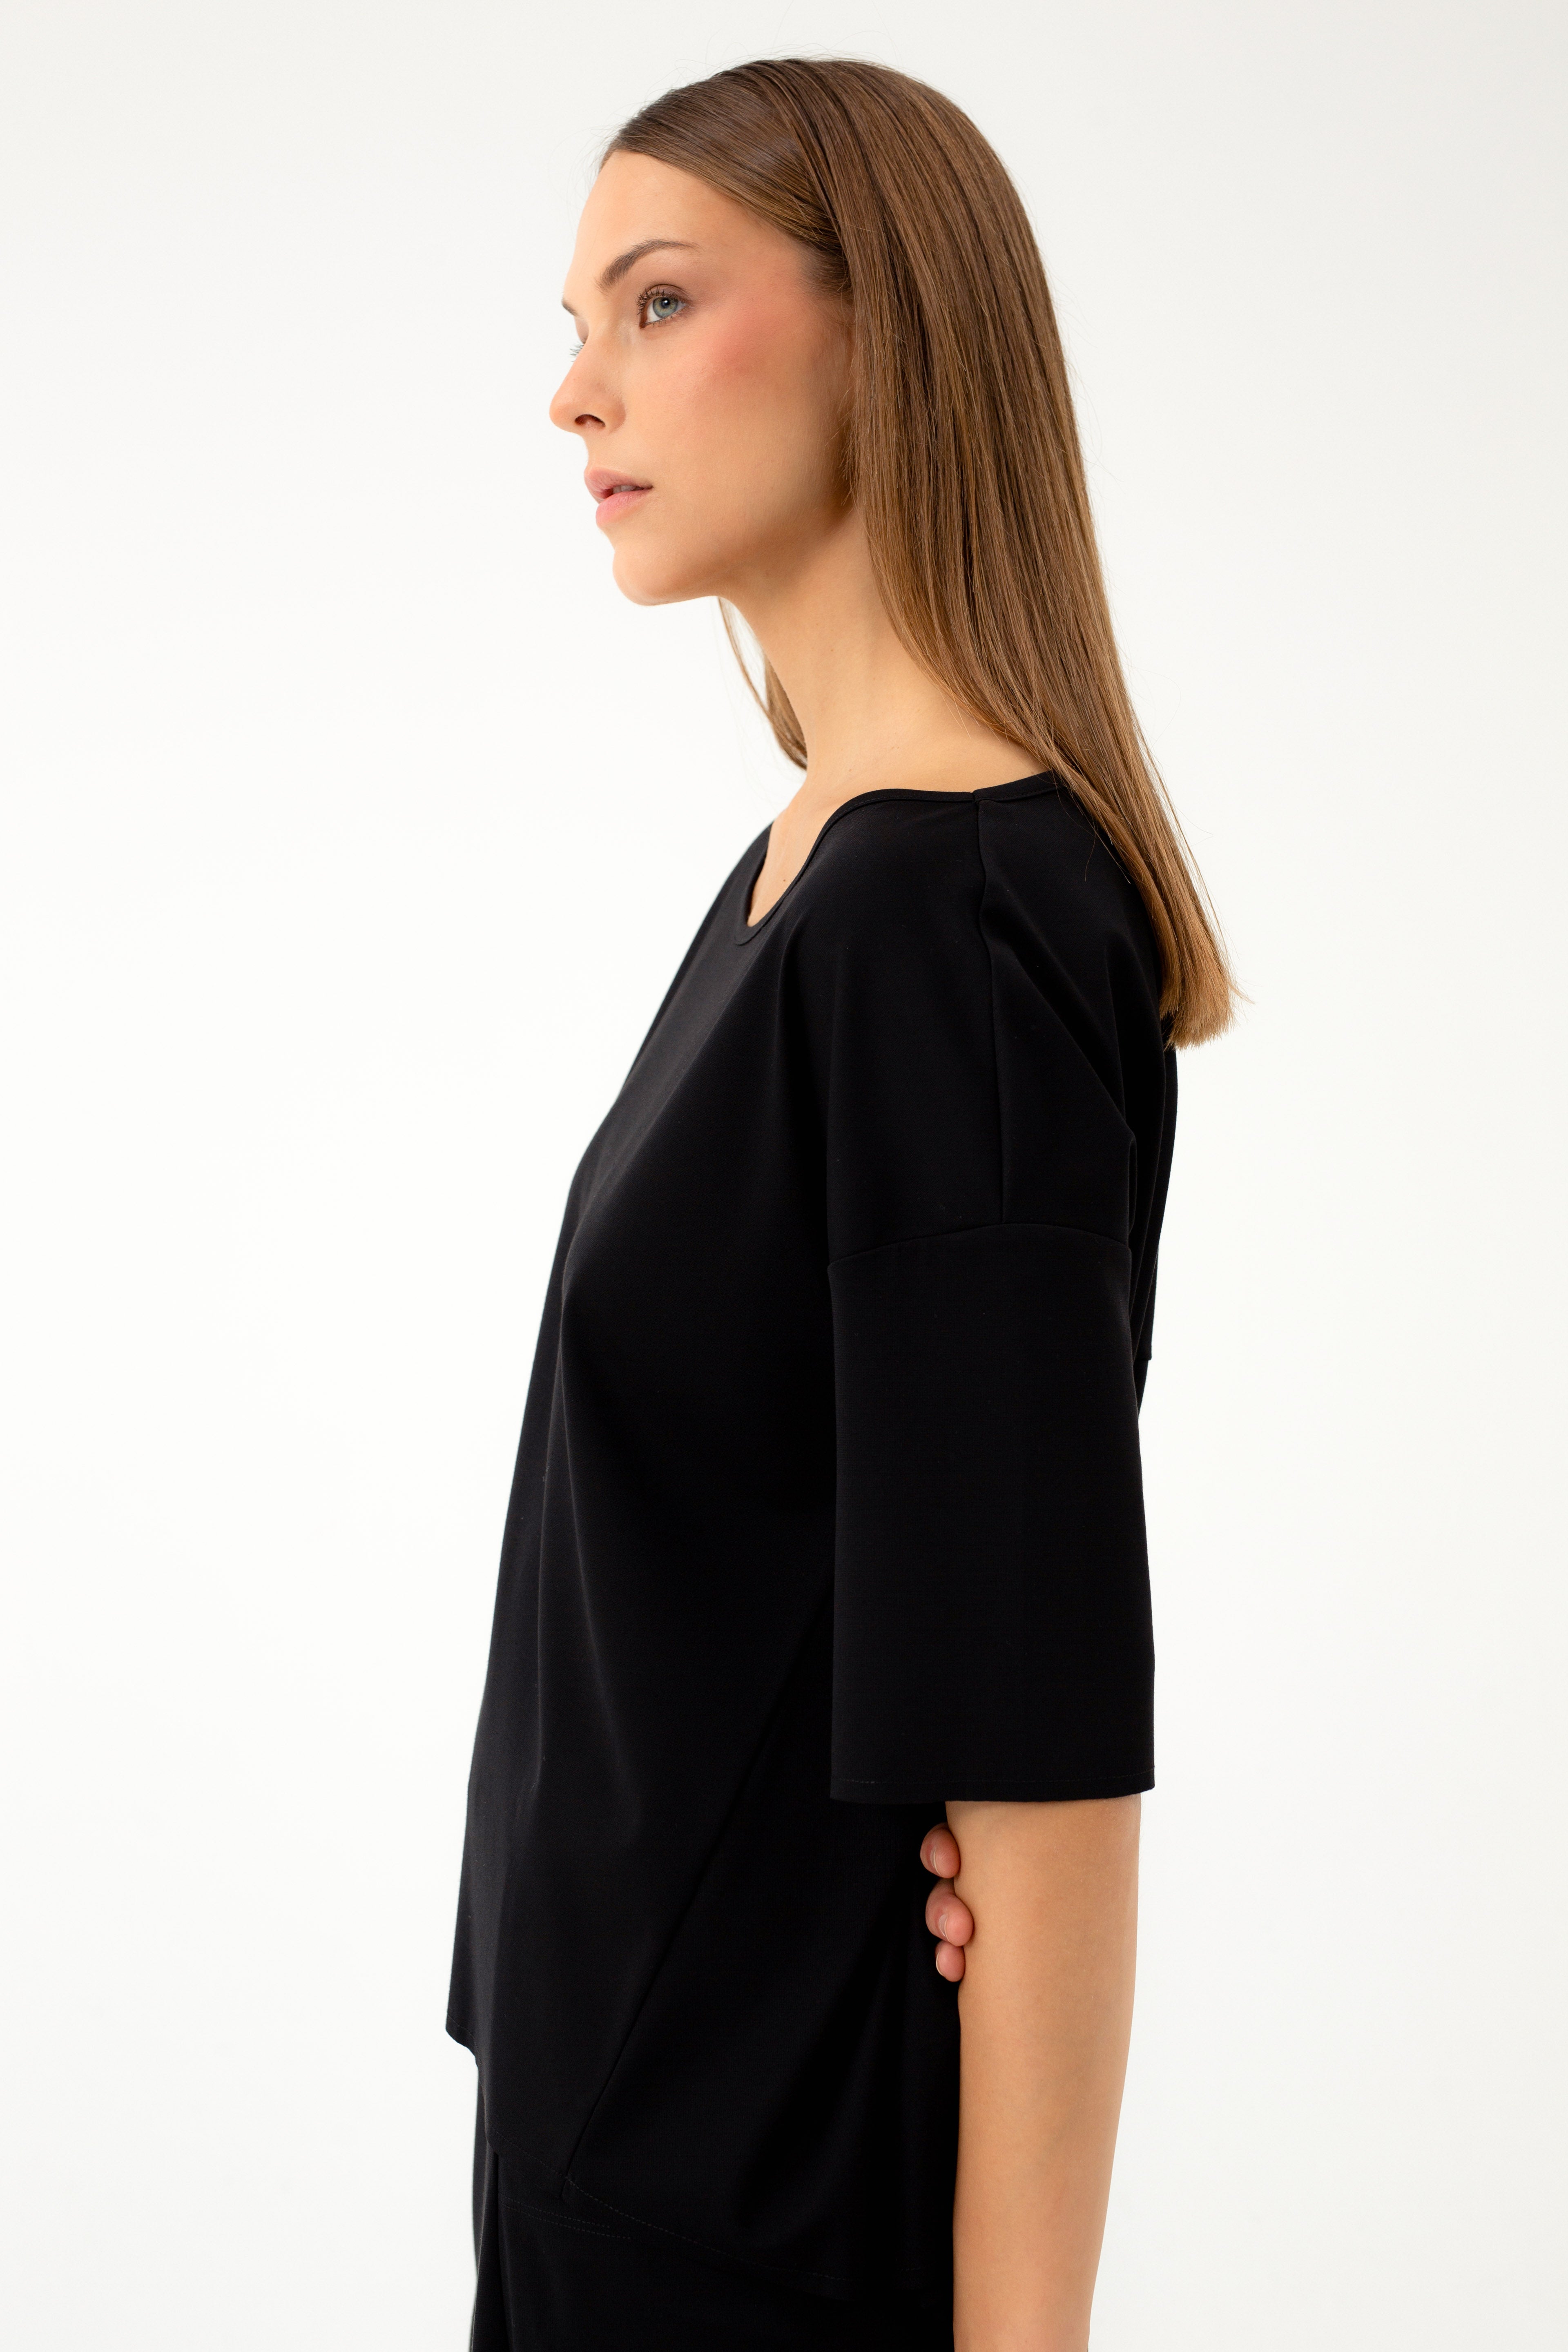 BLACK JERSEY BLOUSE 3/4 SLEEVES